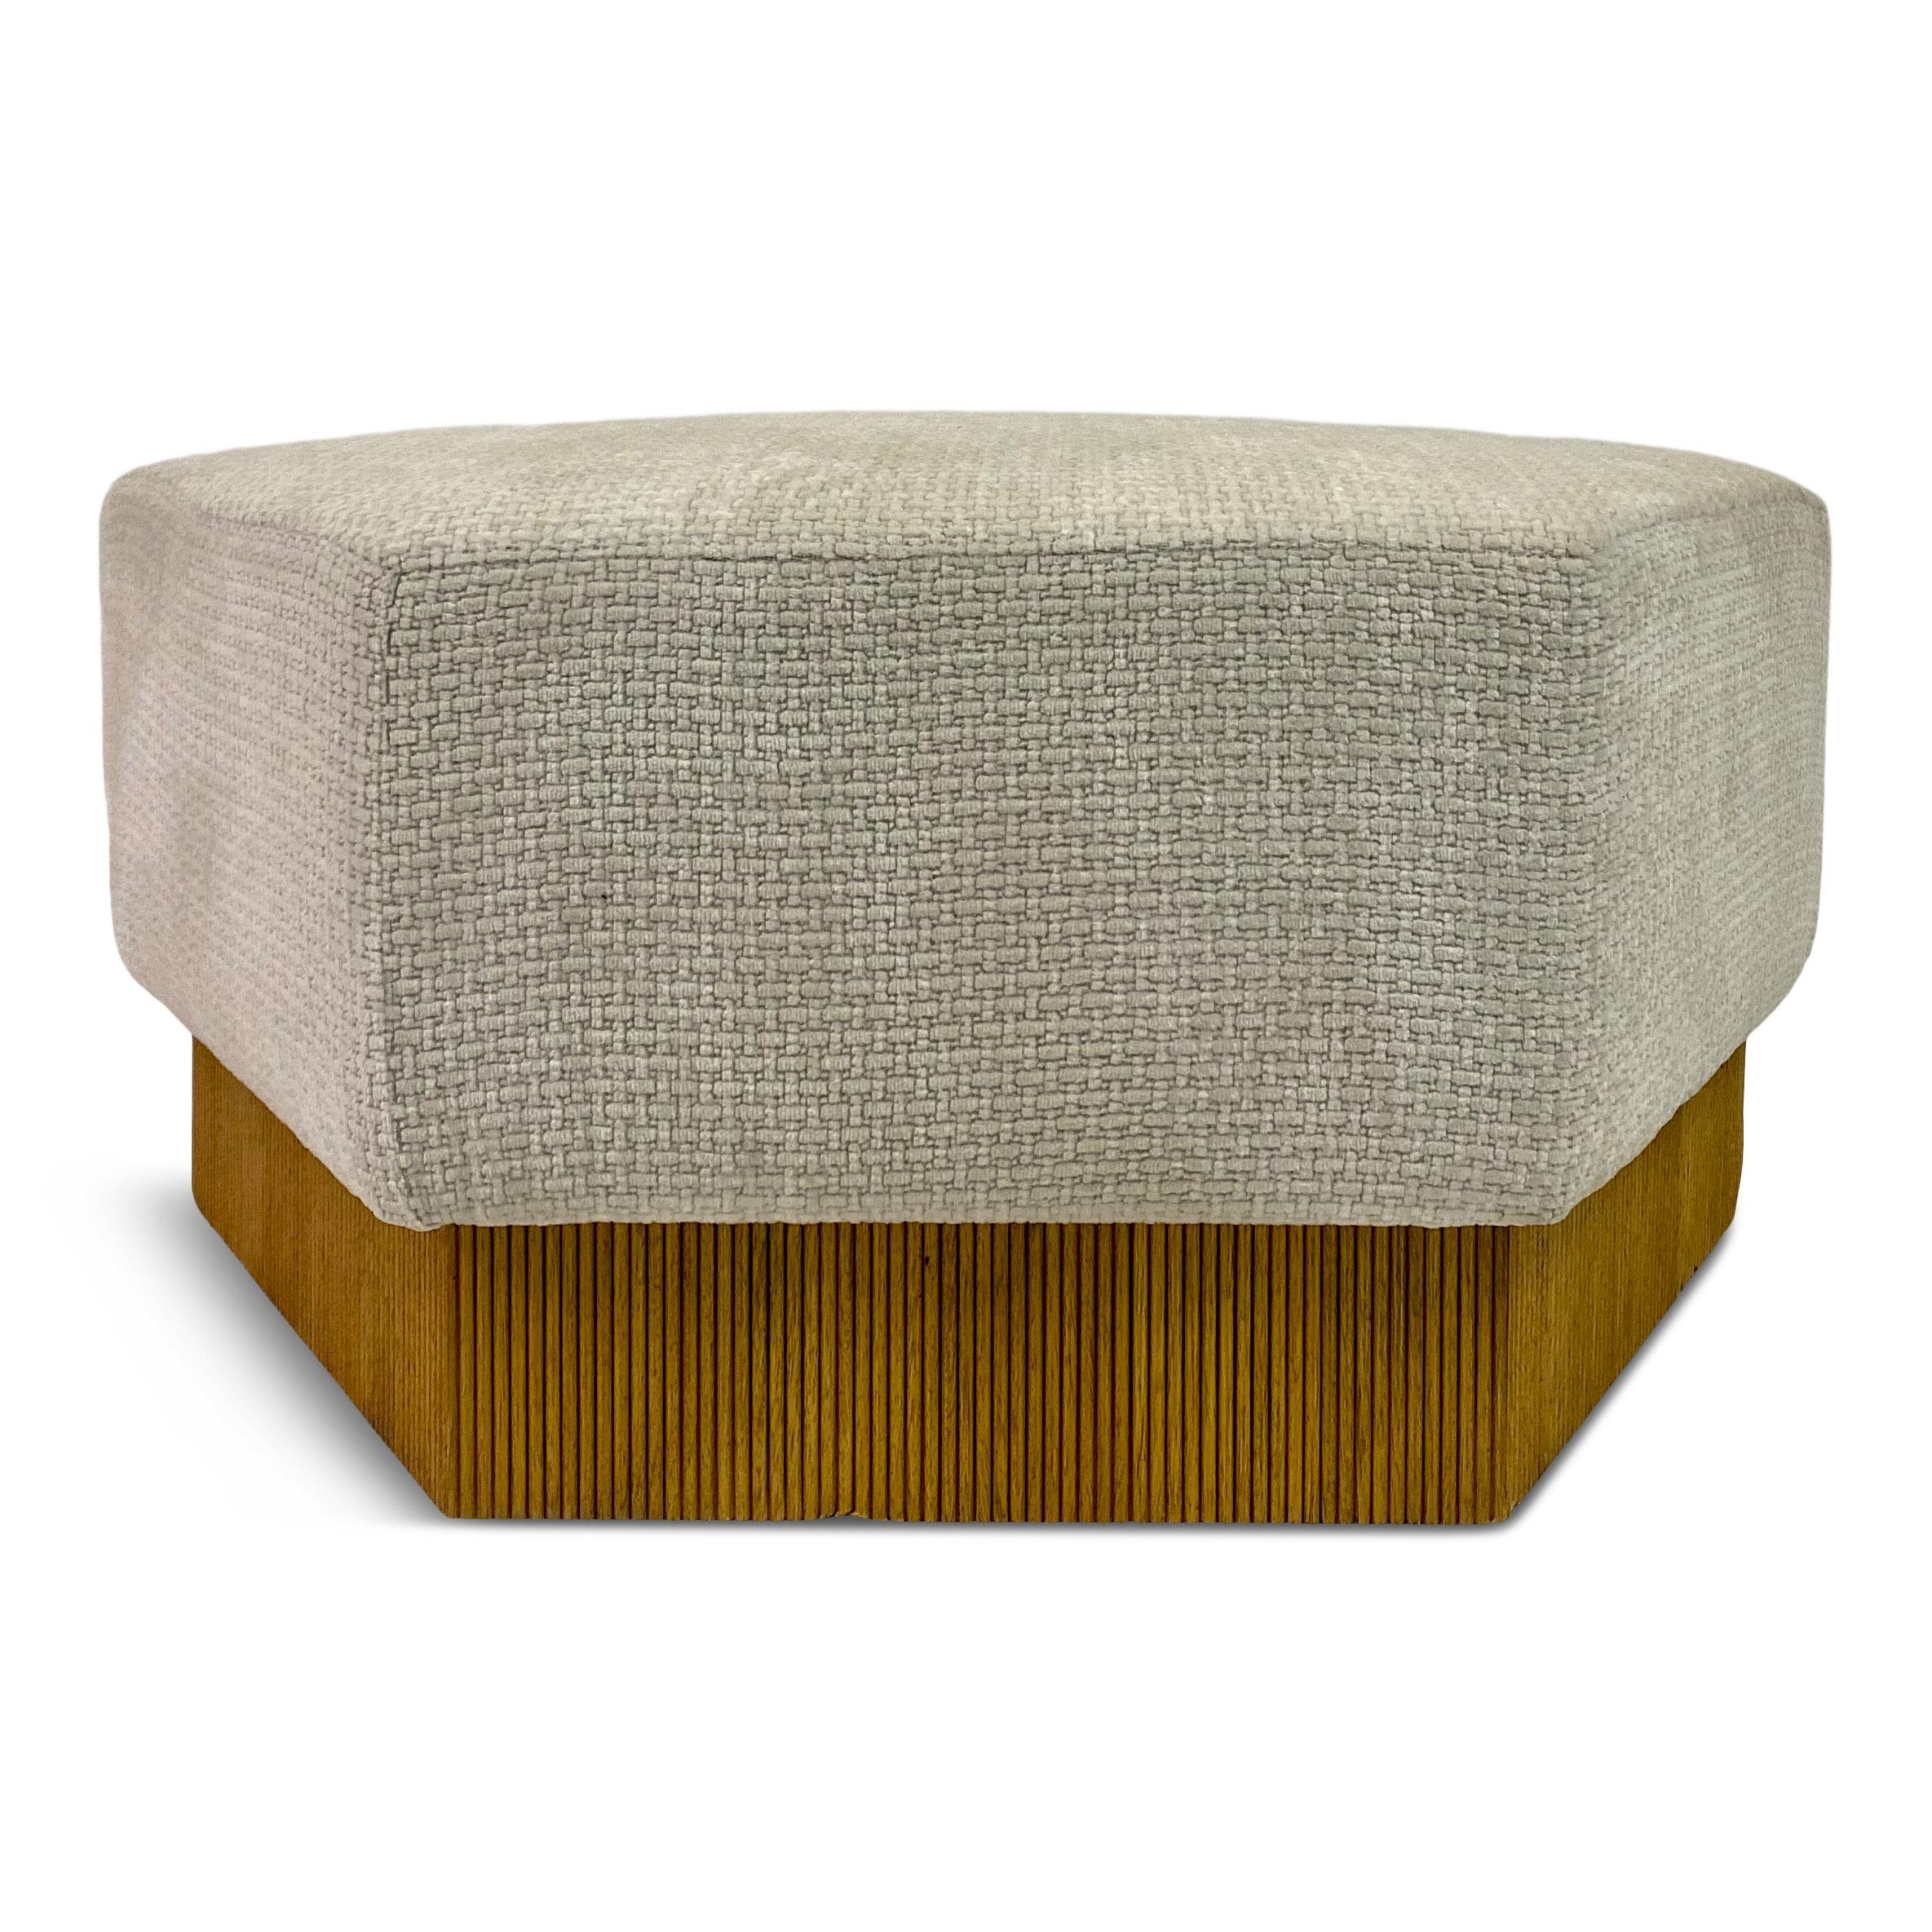 Stool

Pentagonal

Reed bamboo base

Upholstered top

Made to order and upholstered in choice of fabric

One in stock

Italy

